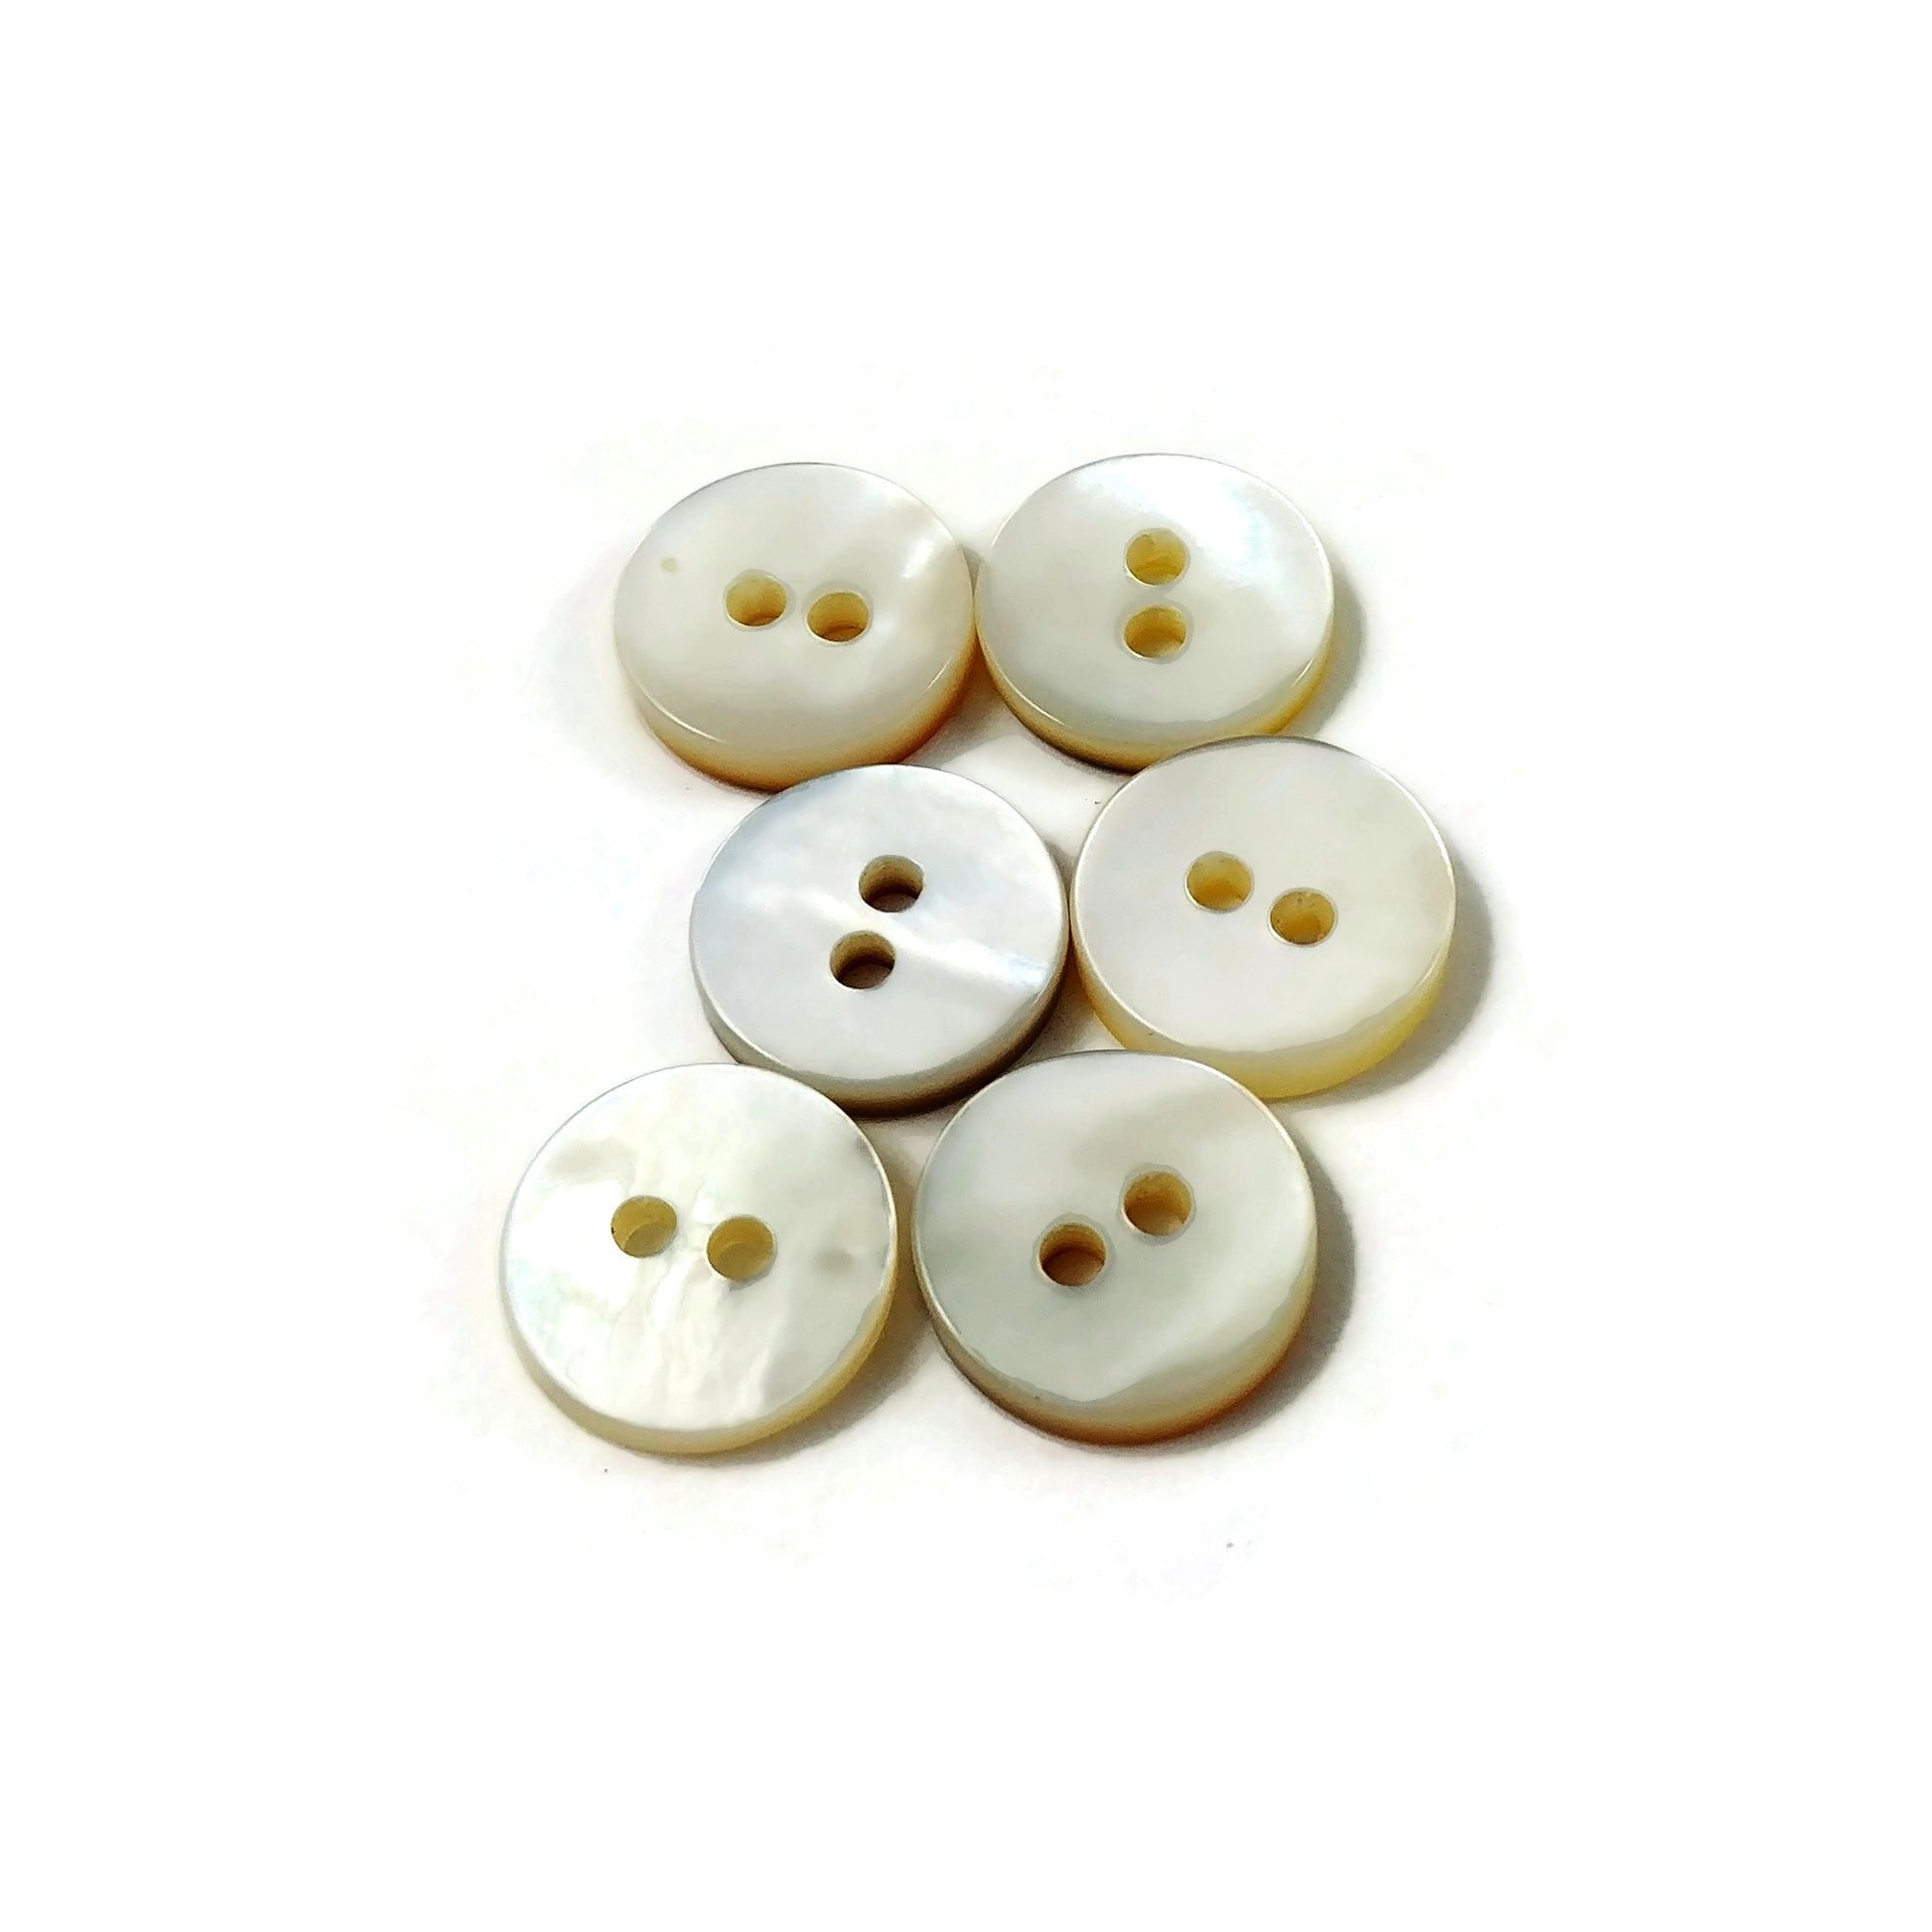 Black Lip Shell Buttons 10mm - set of 6 eco friendly natural shell buttons